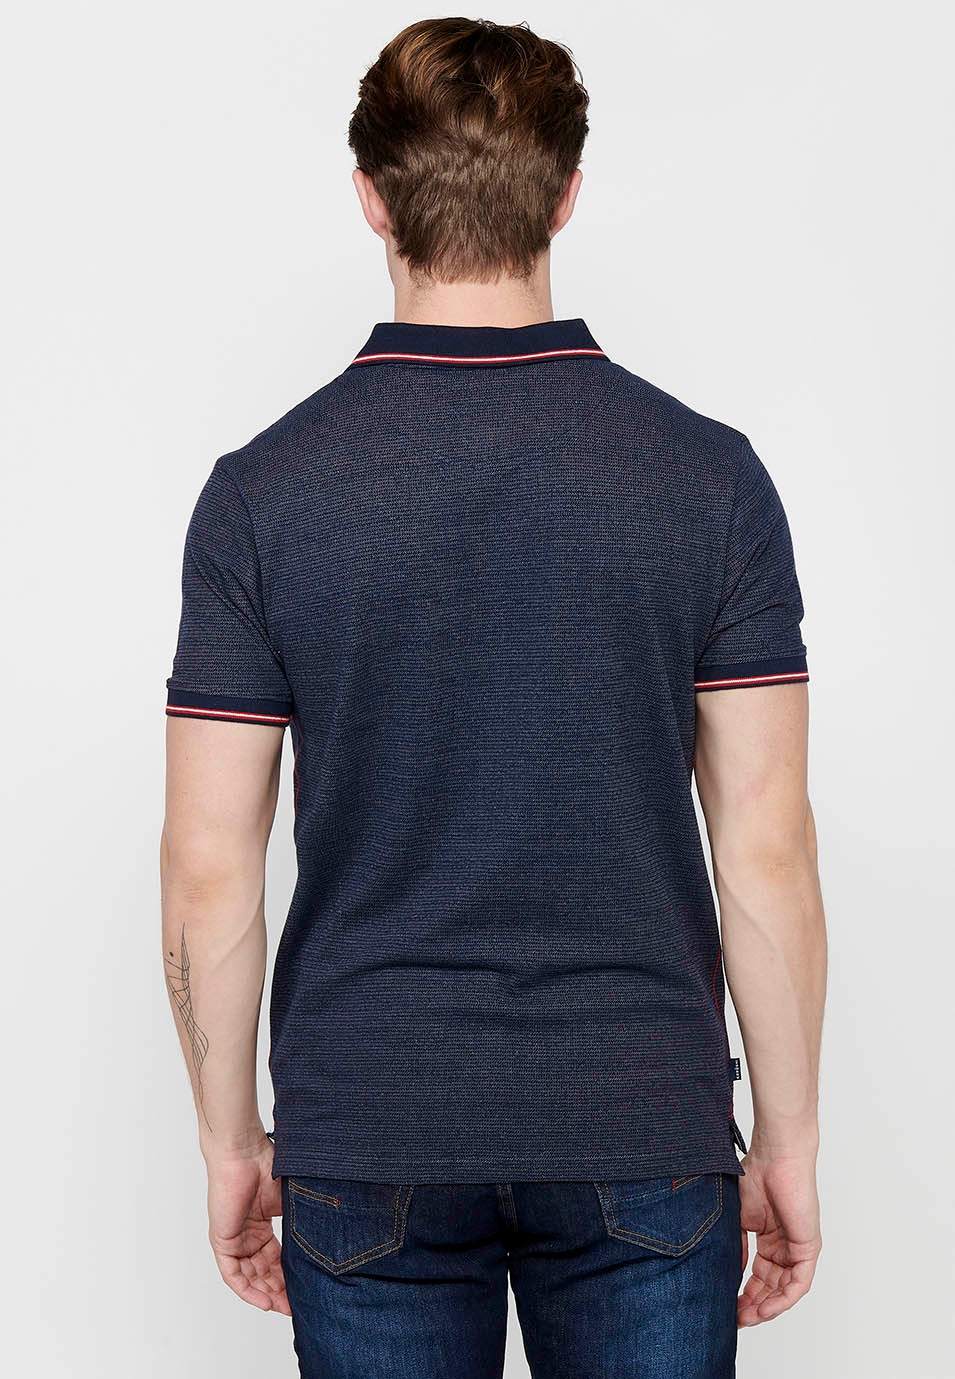 Short-sleeved polo shirt with shirt collar with buttons in Navy Color for Men 5